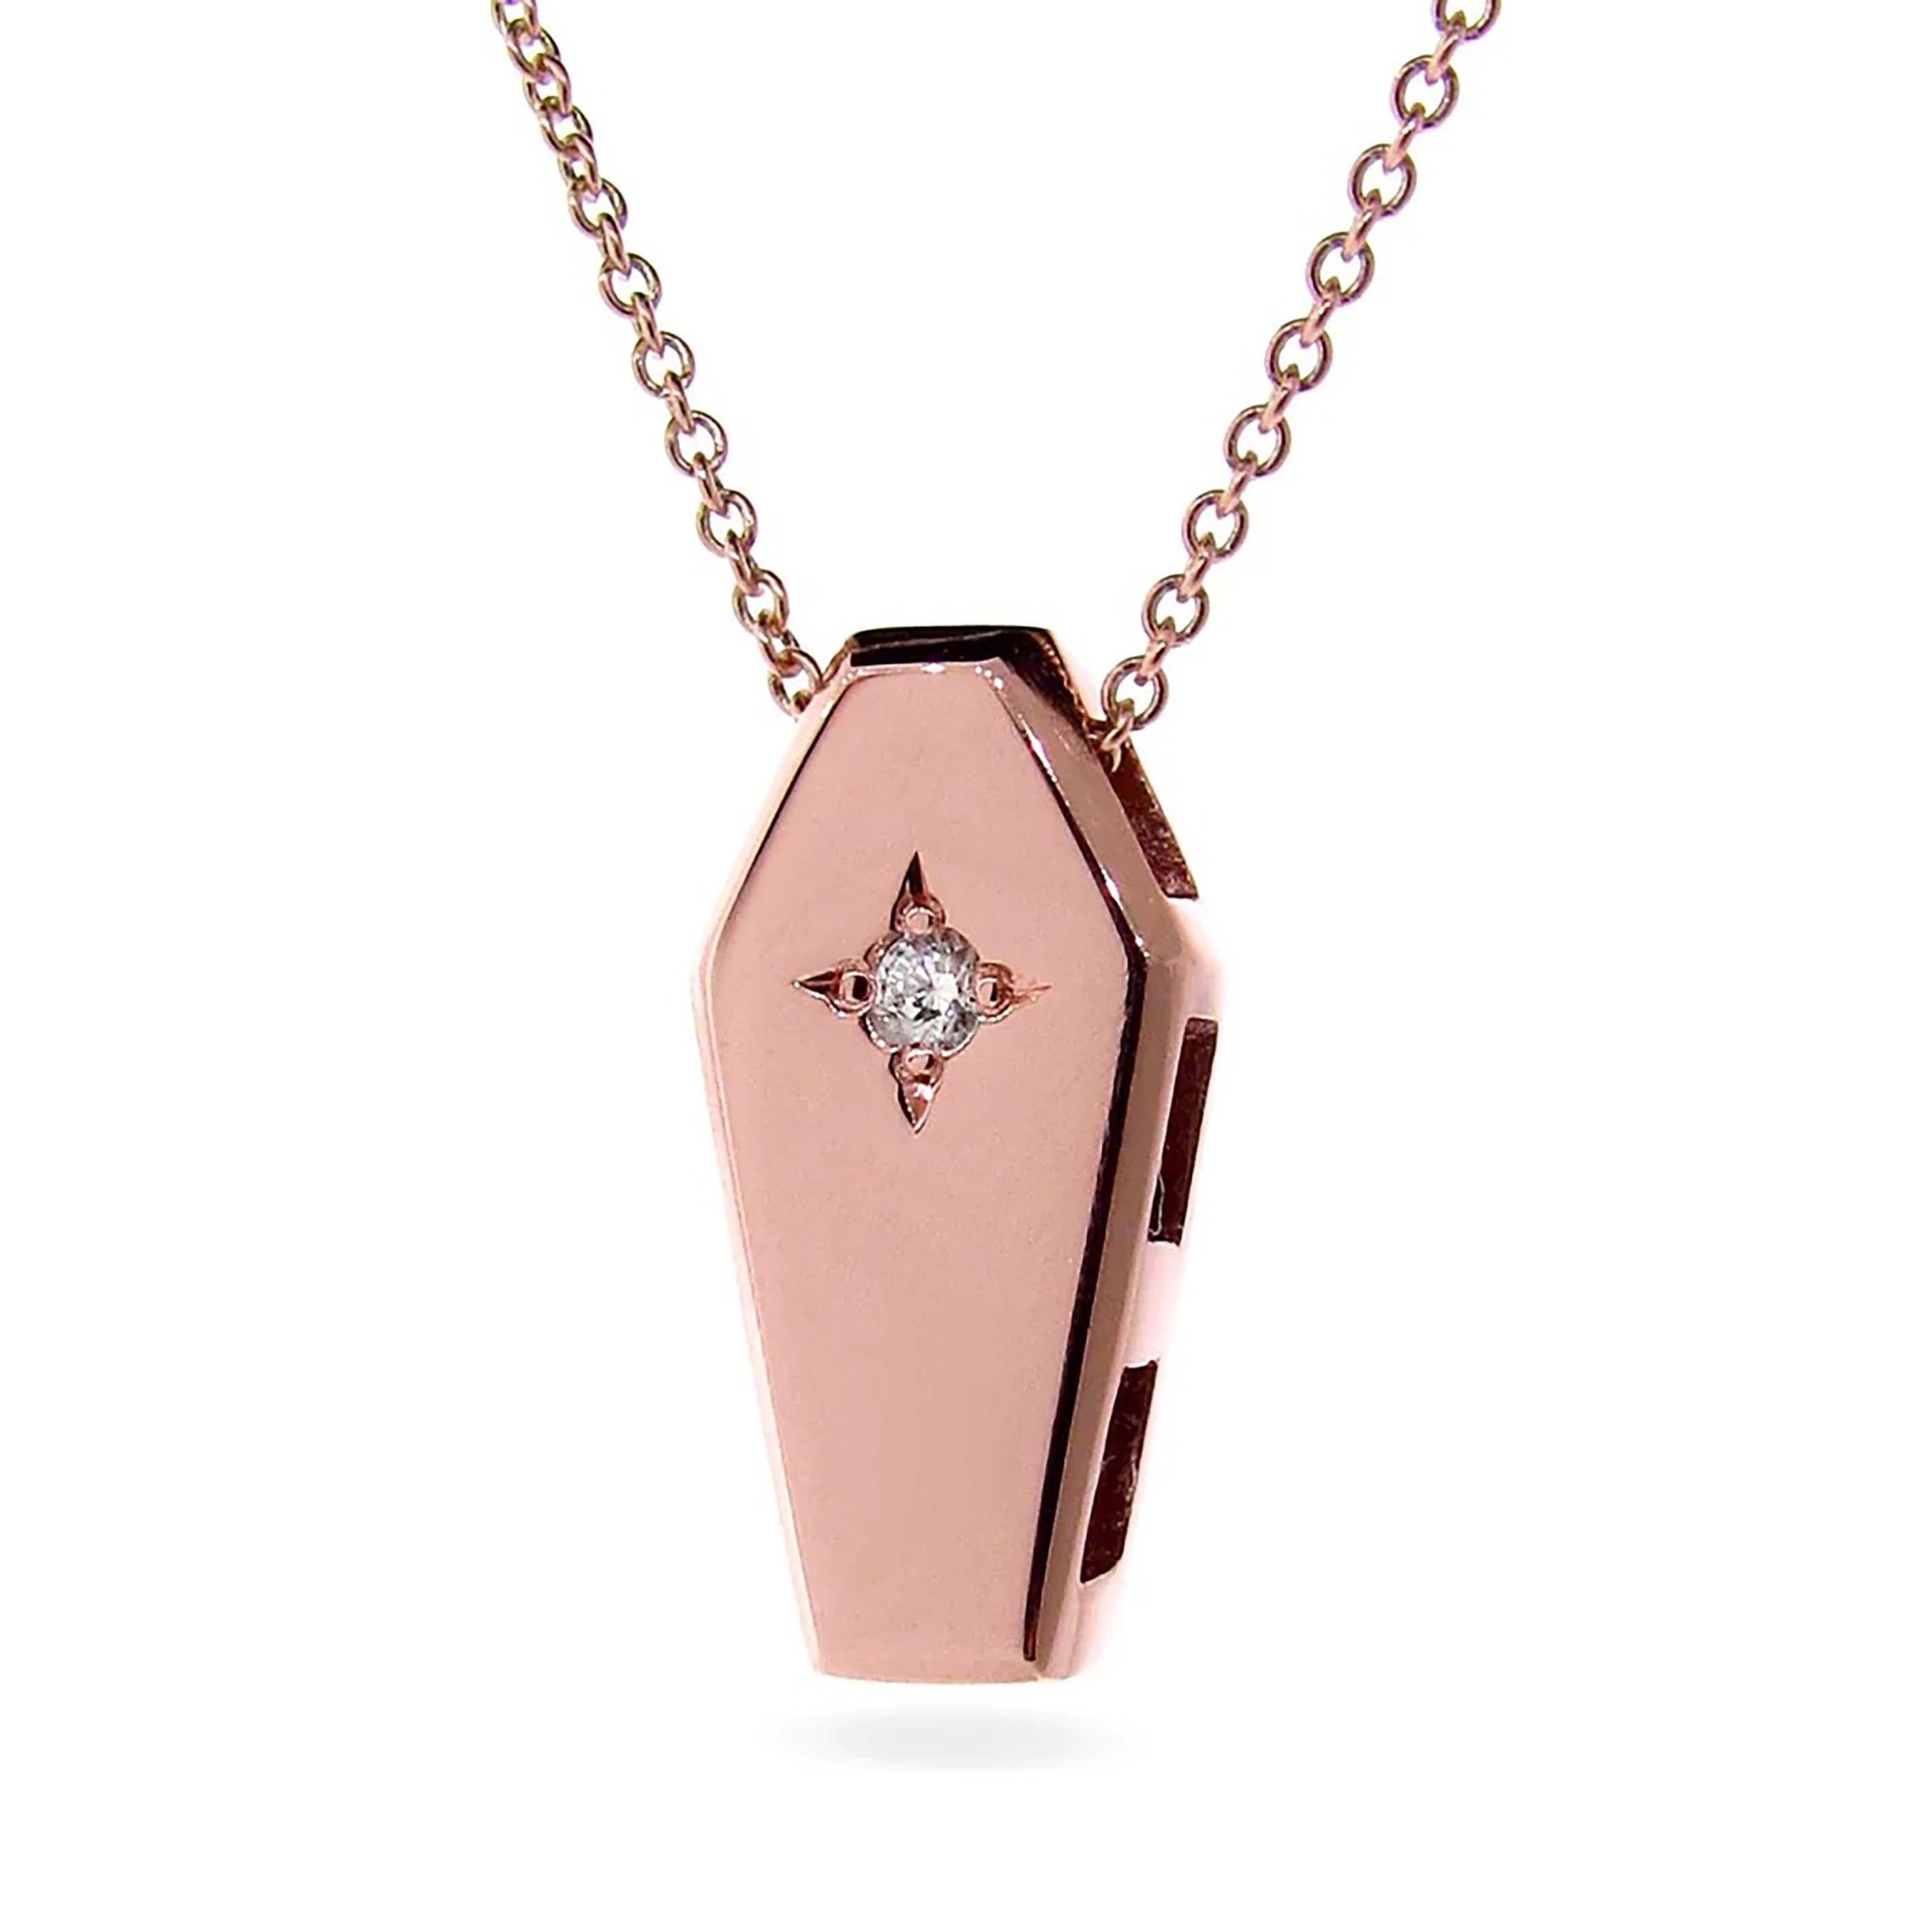 Our unique Rose Gold Diamond Coffin Pendant, is crafted from solid 9k Rose Gold and a natural White star set Diamond, and hangs from a dainty 45cm 9k rose gold cable chain, This exquisite piece captures a timeless sentiment of mortality, a solemn